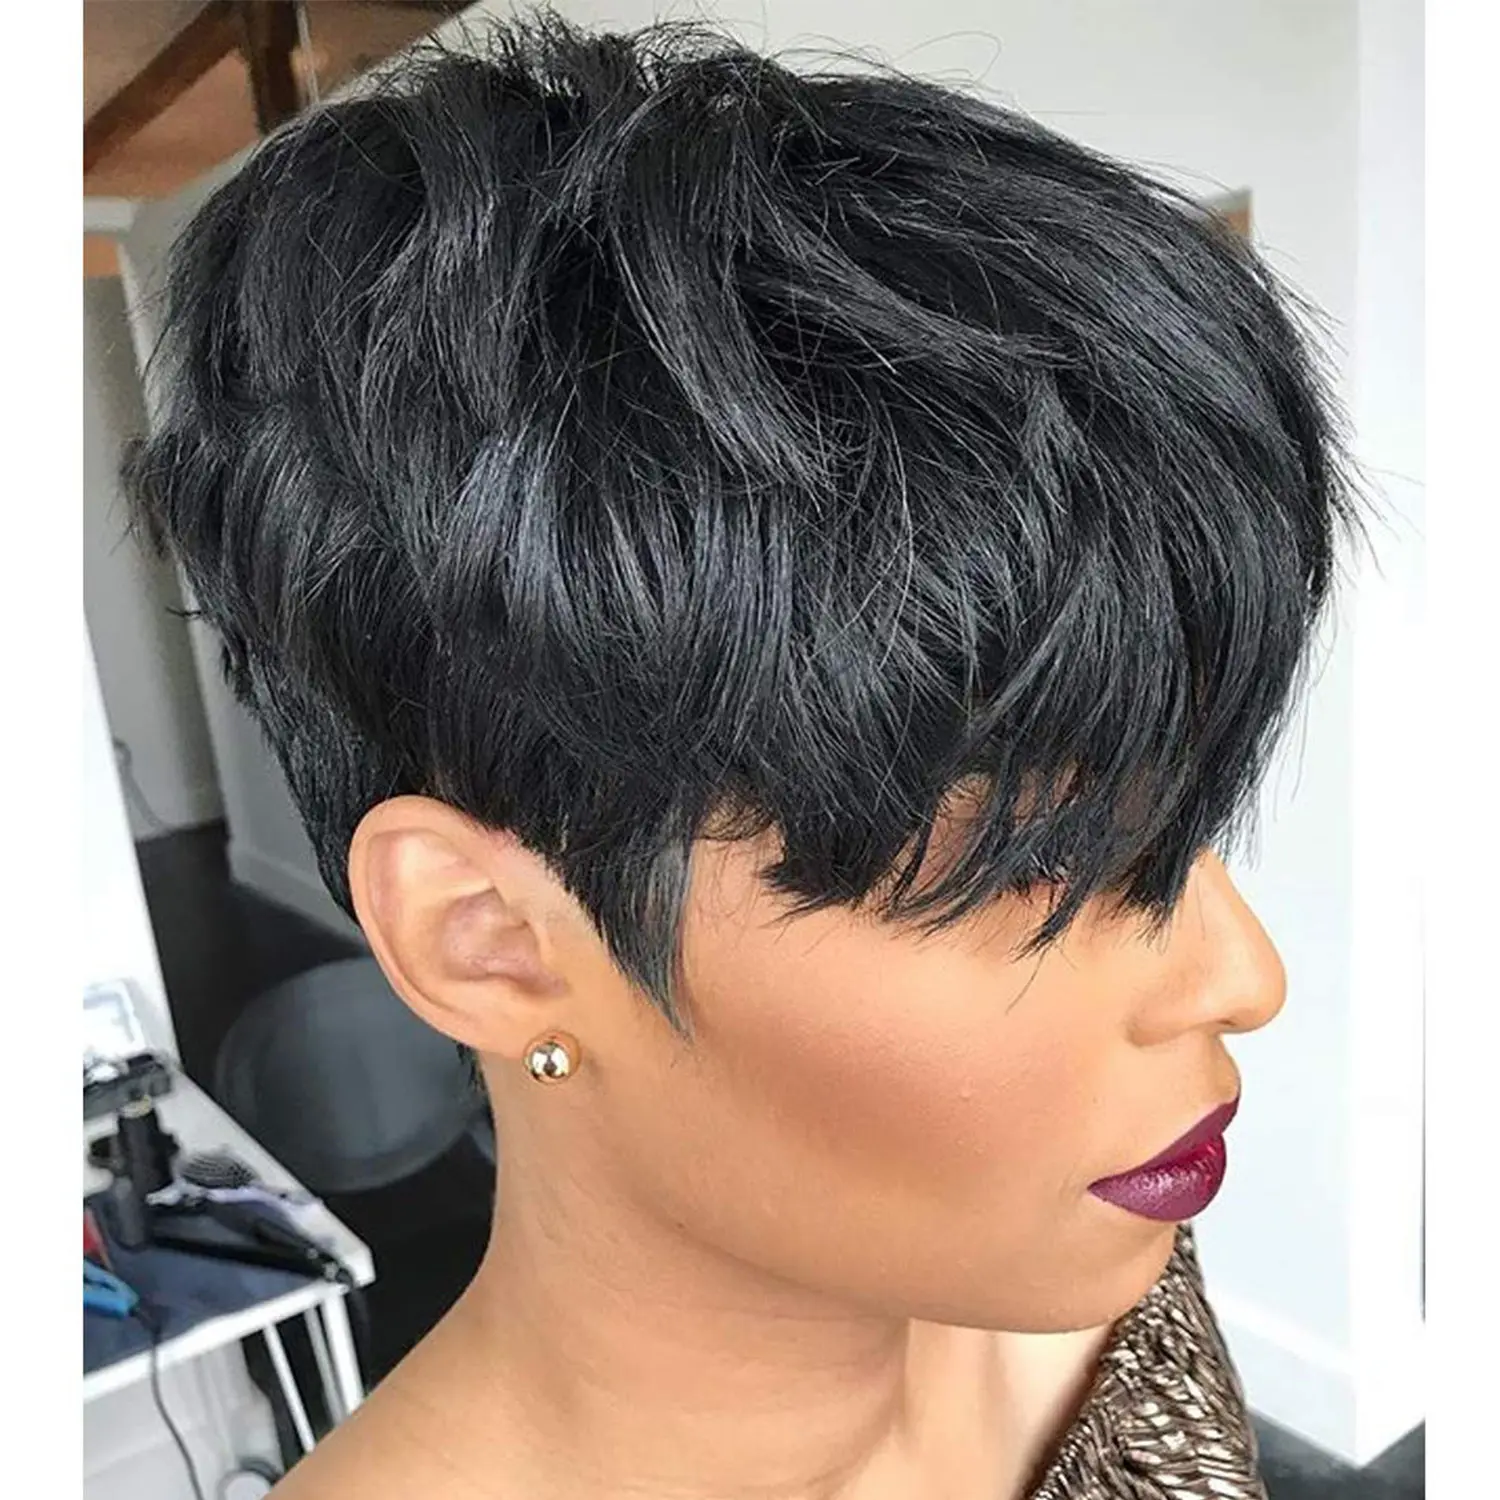 Pixie Cut Wigs With Bangs Burgundy Color Wigs Cute Brazilian Short Red Layered Wavy Wigs For Women